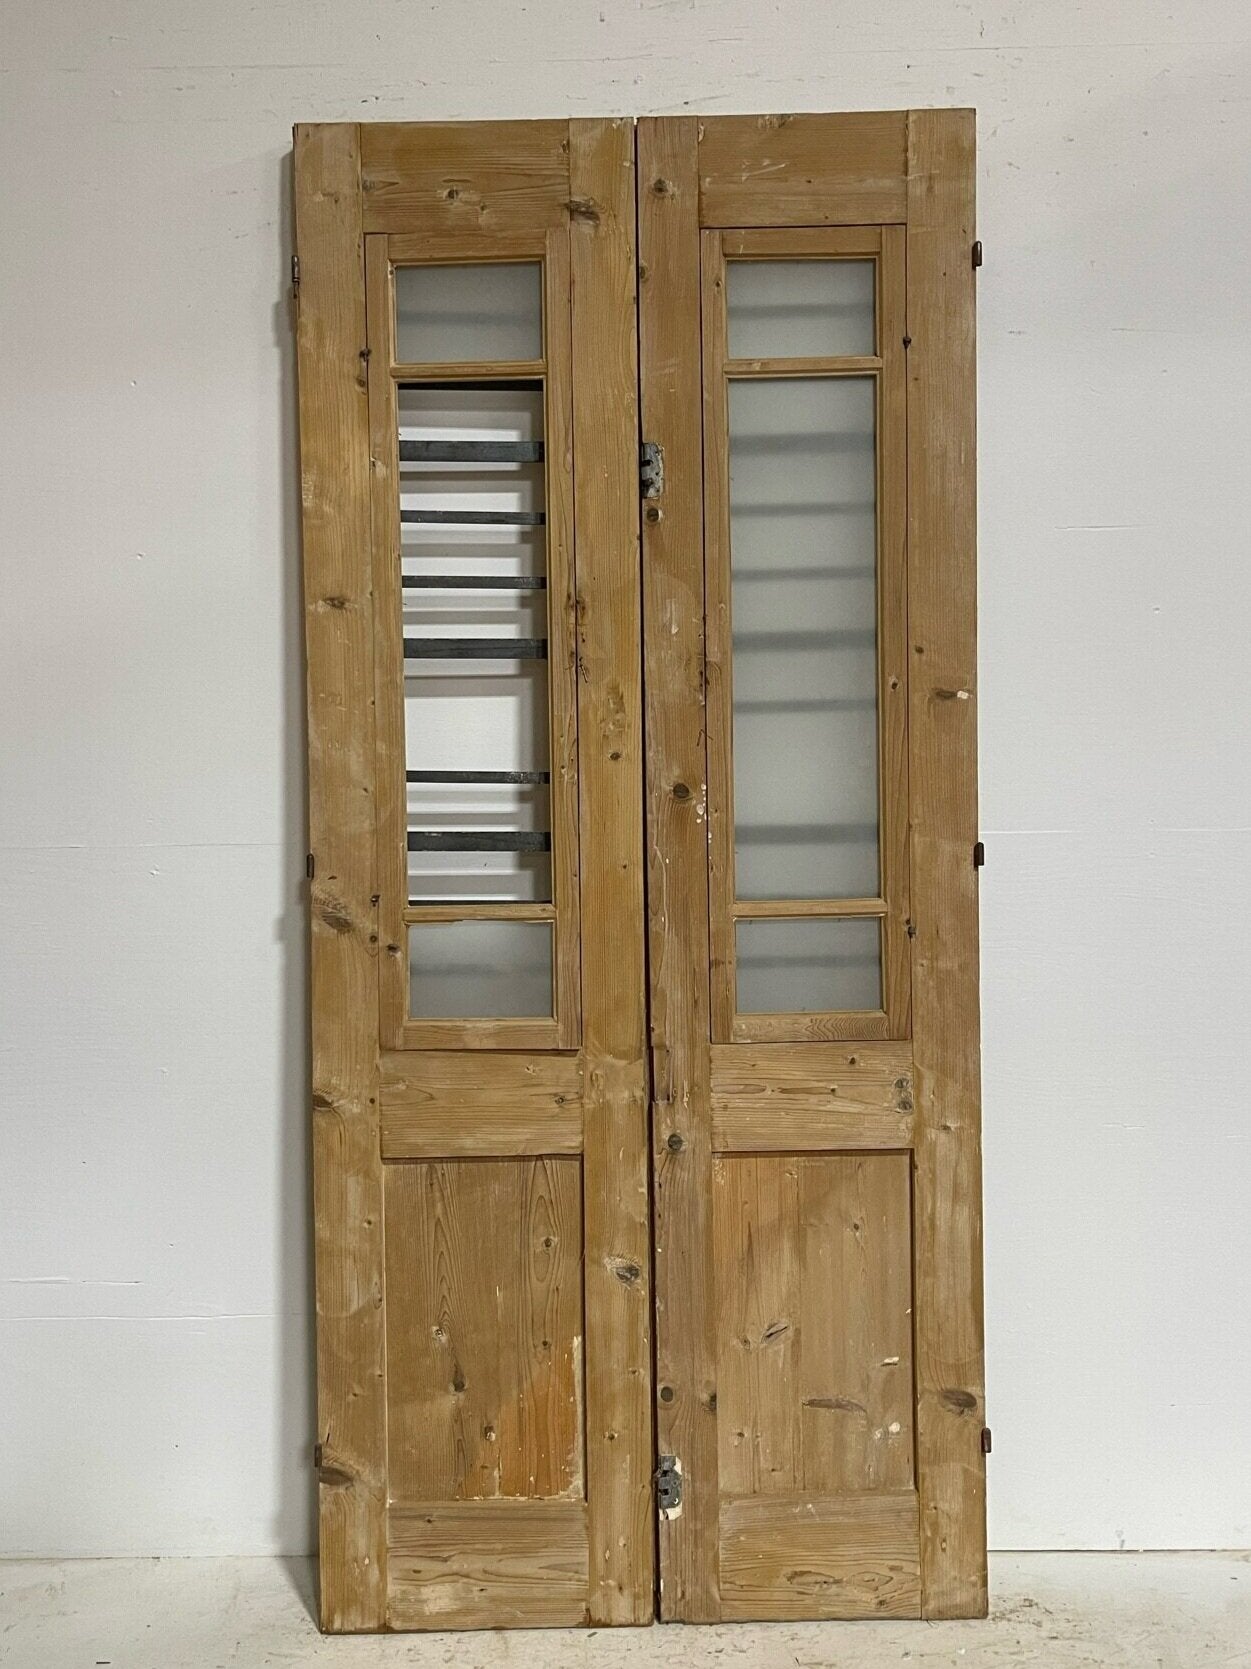 Antique French doors (91.5X40.75) with glass G1580